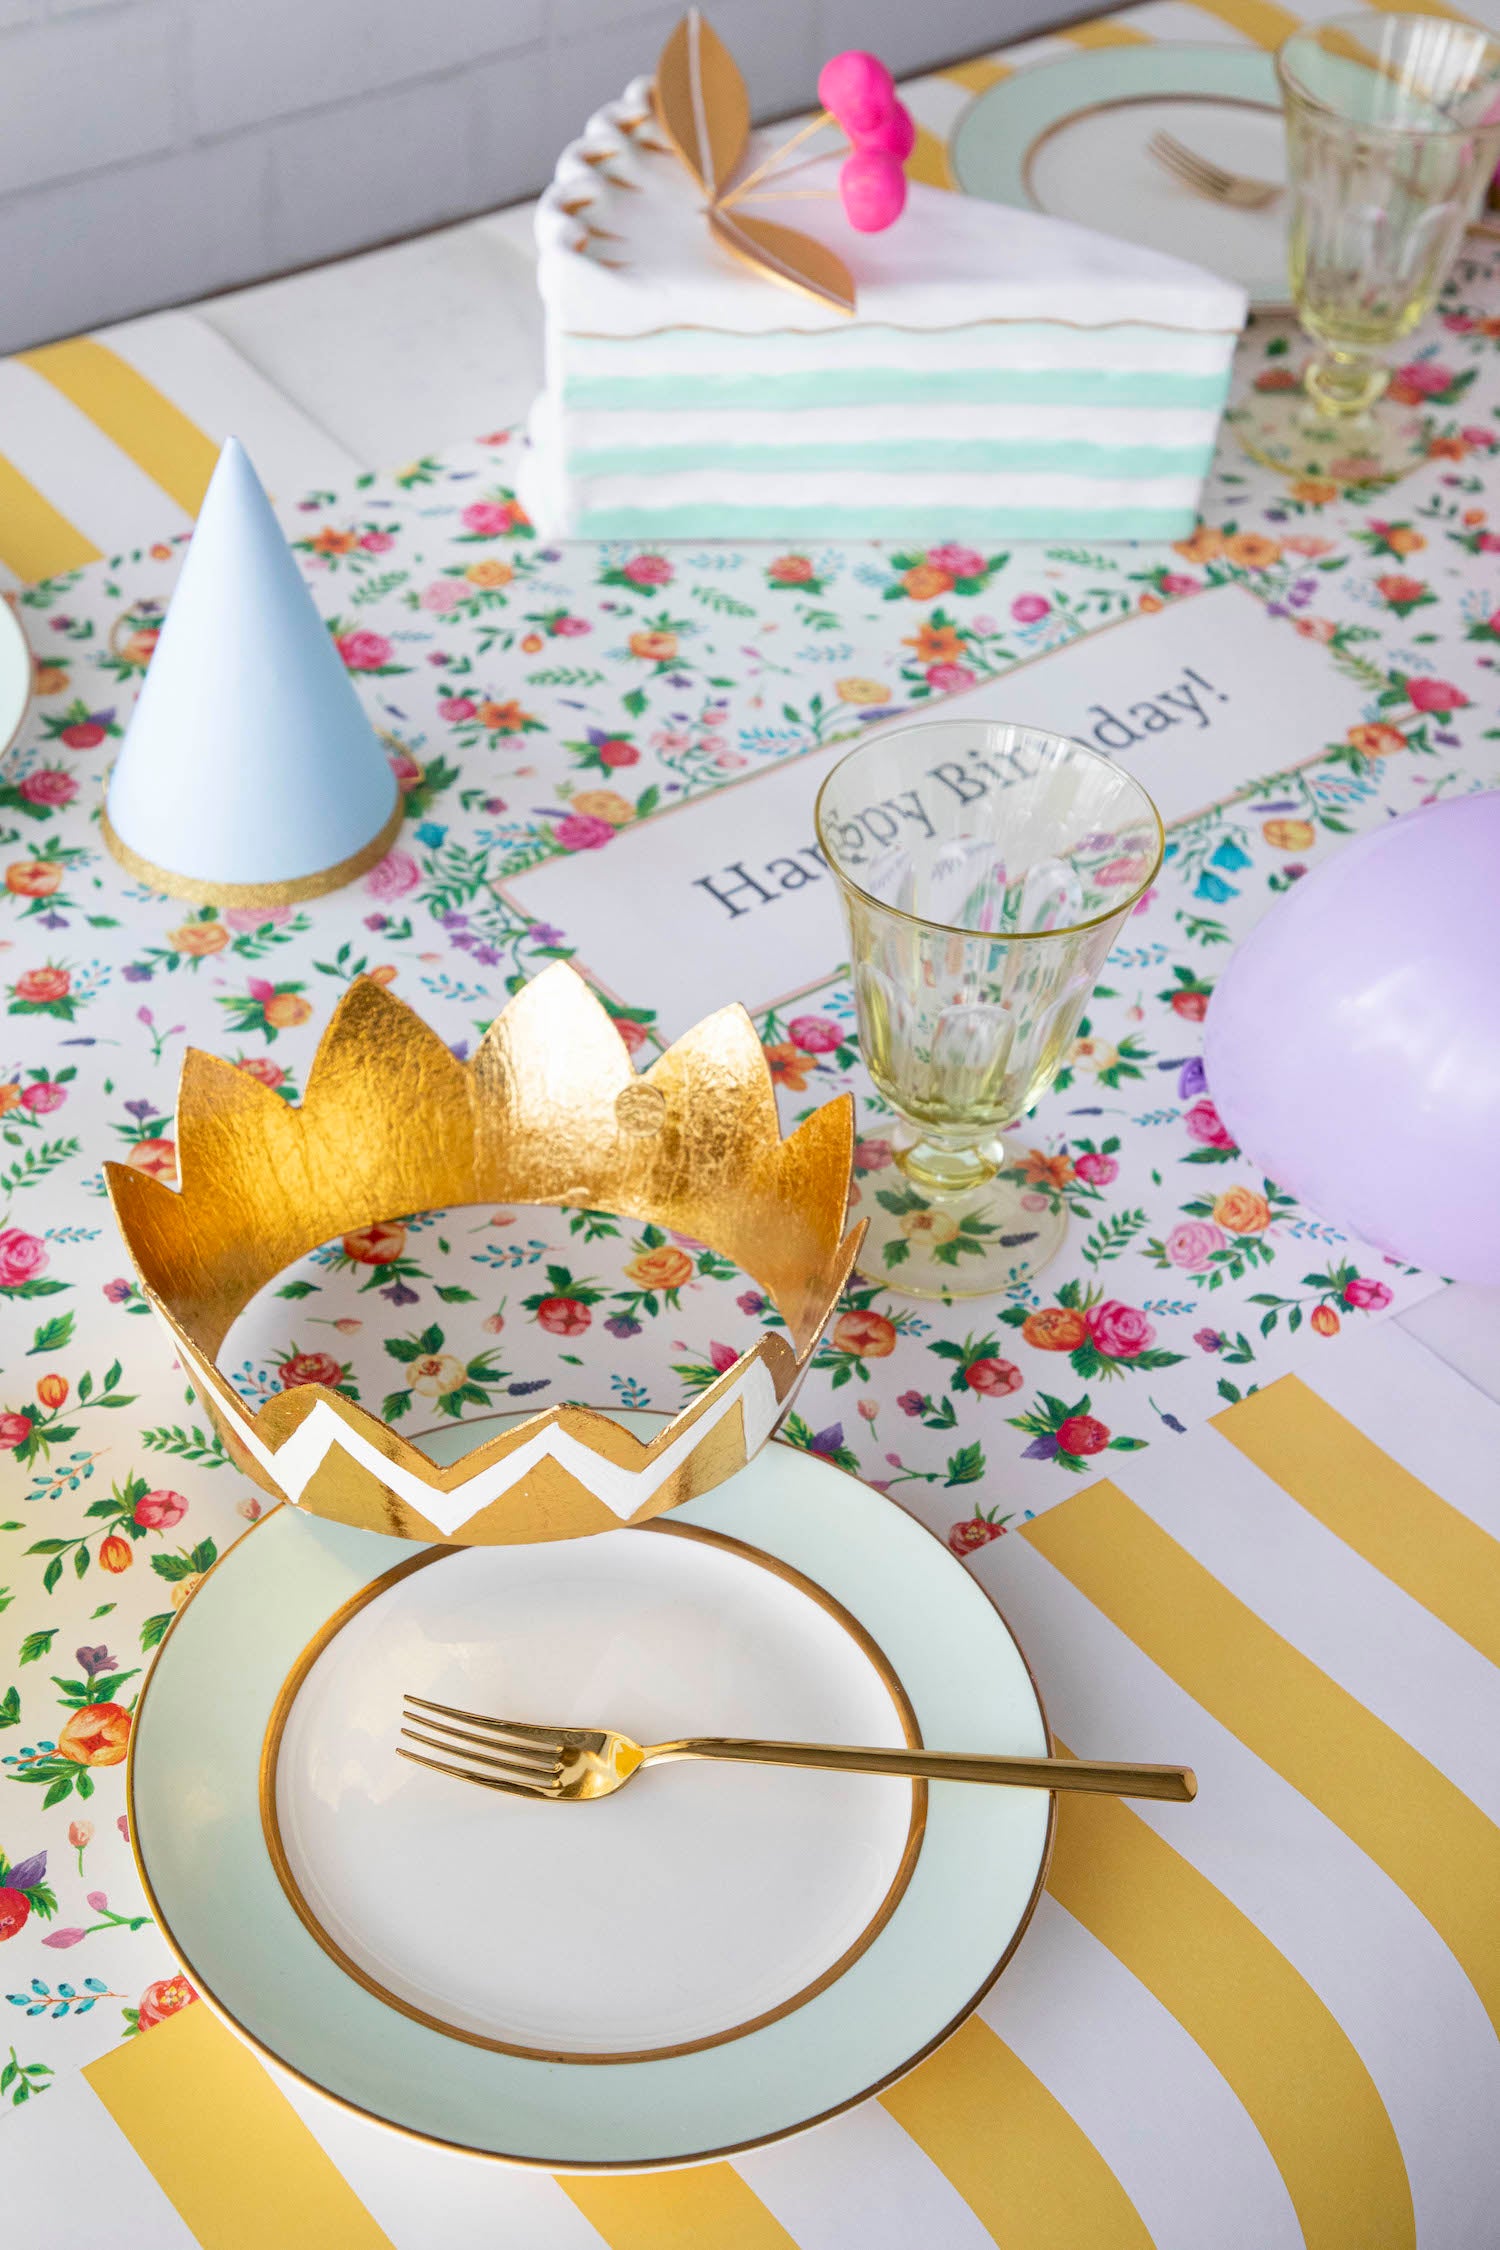 The Sweet Garden Personalized Runner under an elegant Birthday tablescape, with &quot;Happy Birthday!&quot; printed in the middle.